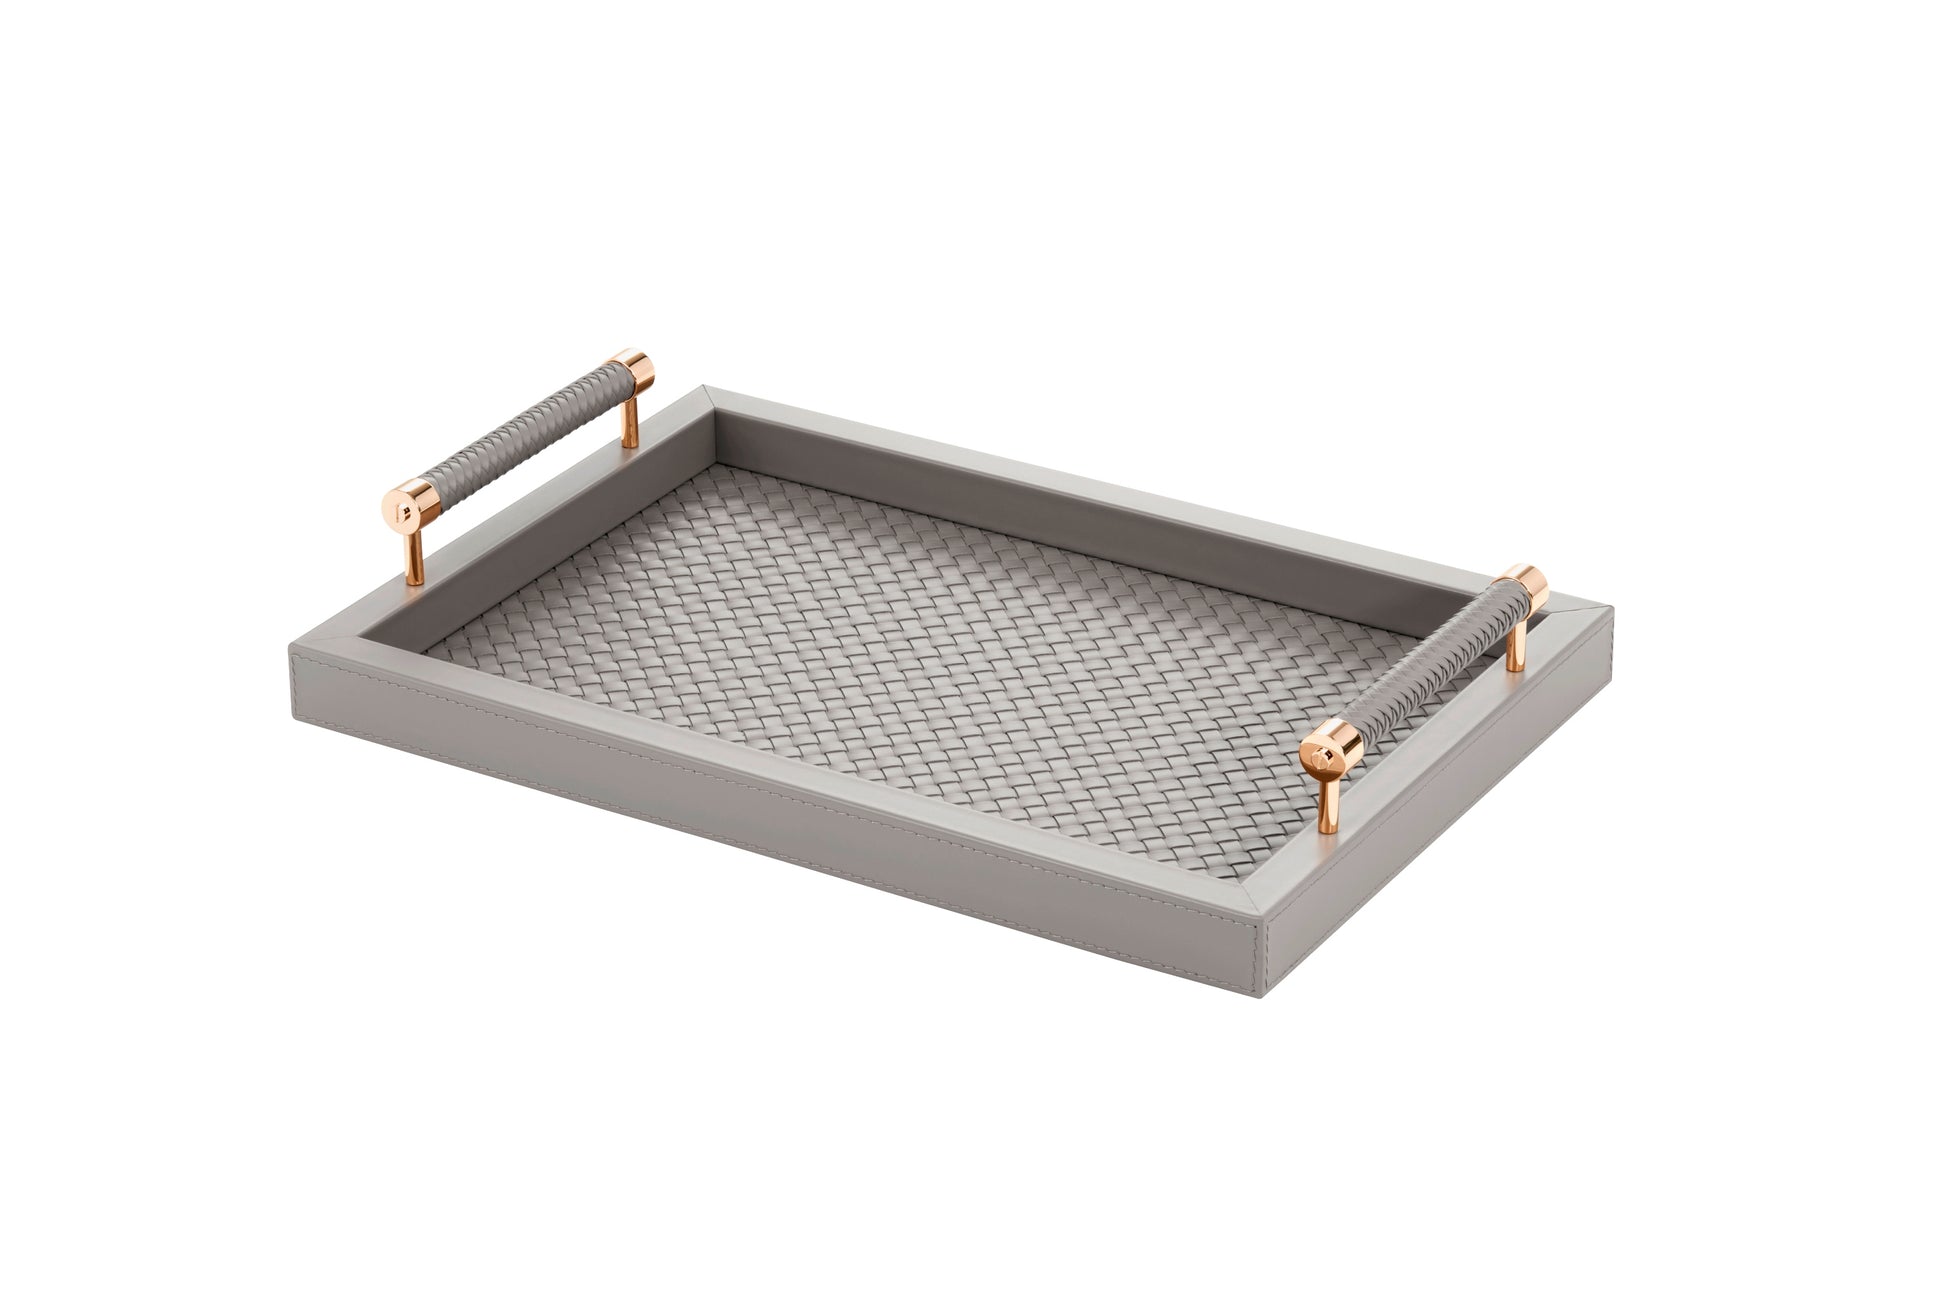 Diana Handwoven Leather Tray by Riviere | Leather tray with handwoven leather lining and handwoven leather handles. | Home Decor and Serveware | 2Jour Concierge, your luxury lifestyle shop